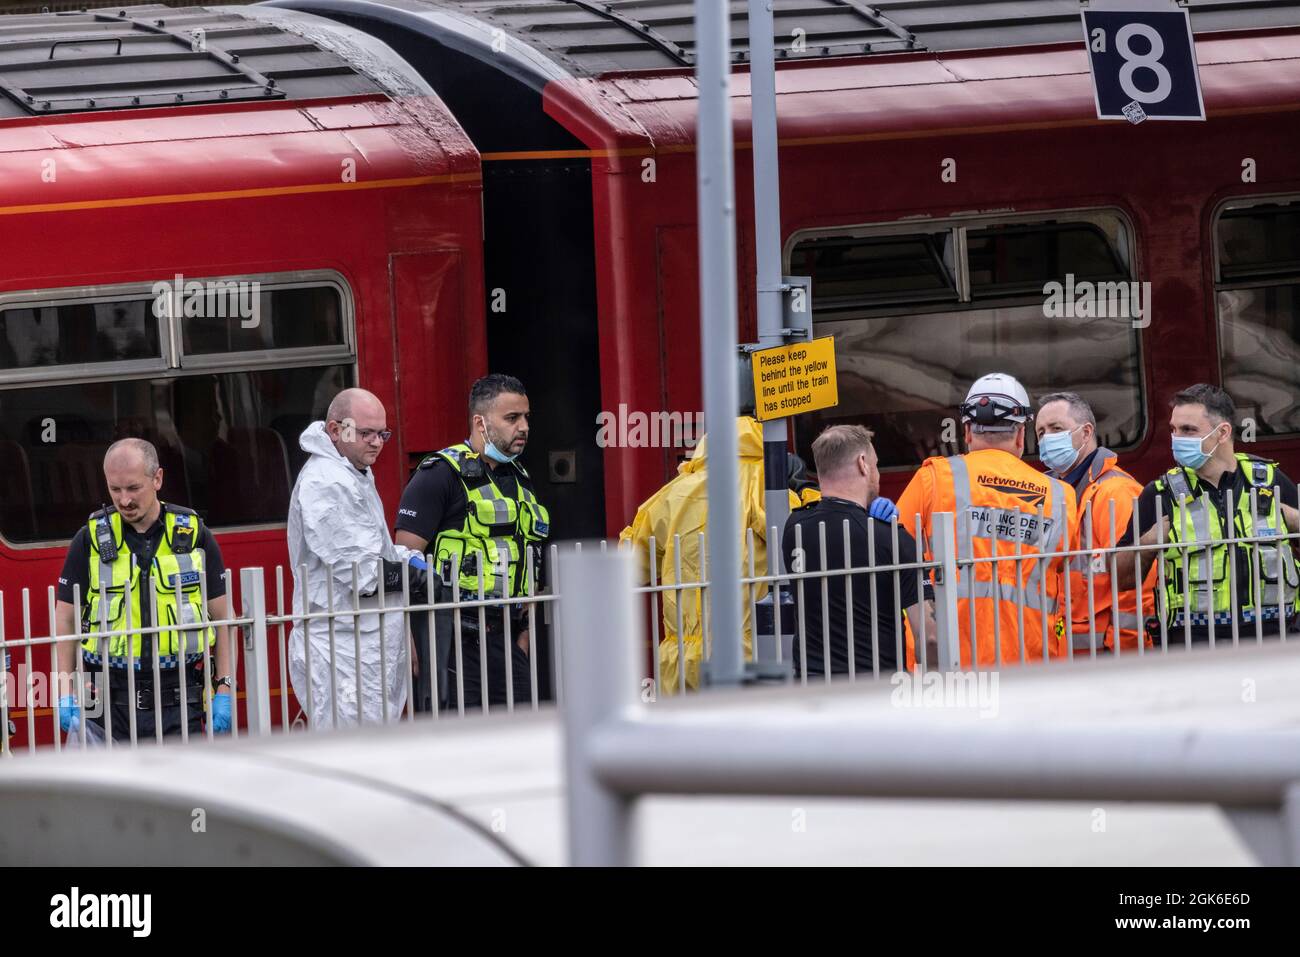 London, UK. September 13 2021: Rail Track Accident at Wimbledon main Train Station. The station has been closed for train & tram travel due to an incident. 13th September 2021 Credit: Clickpics/Alamy Live News Stock Photo